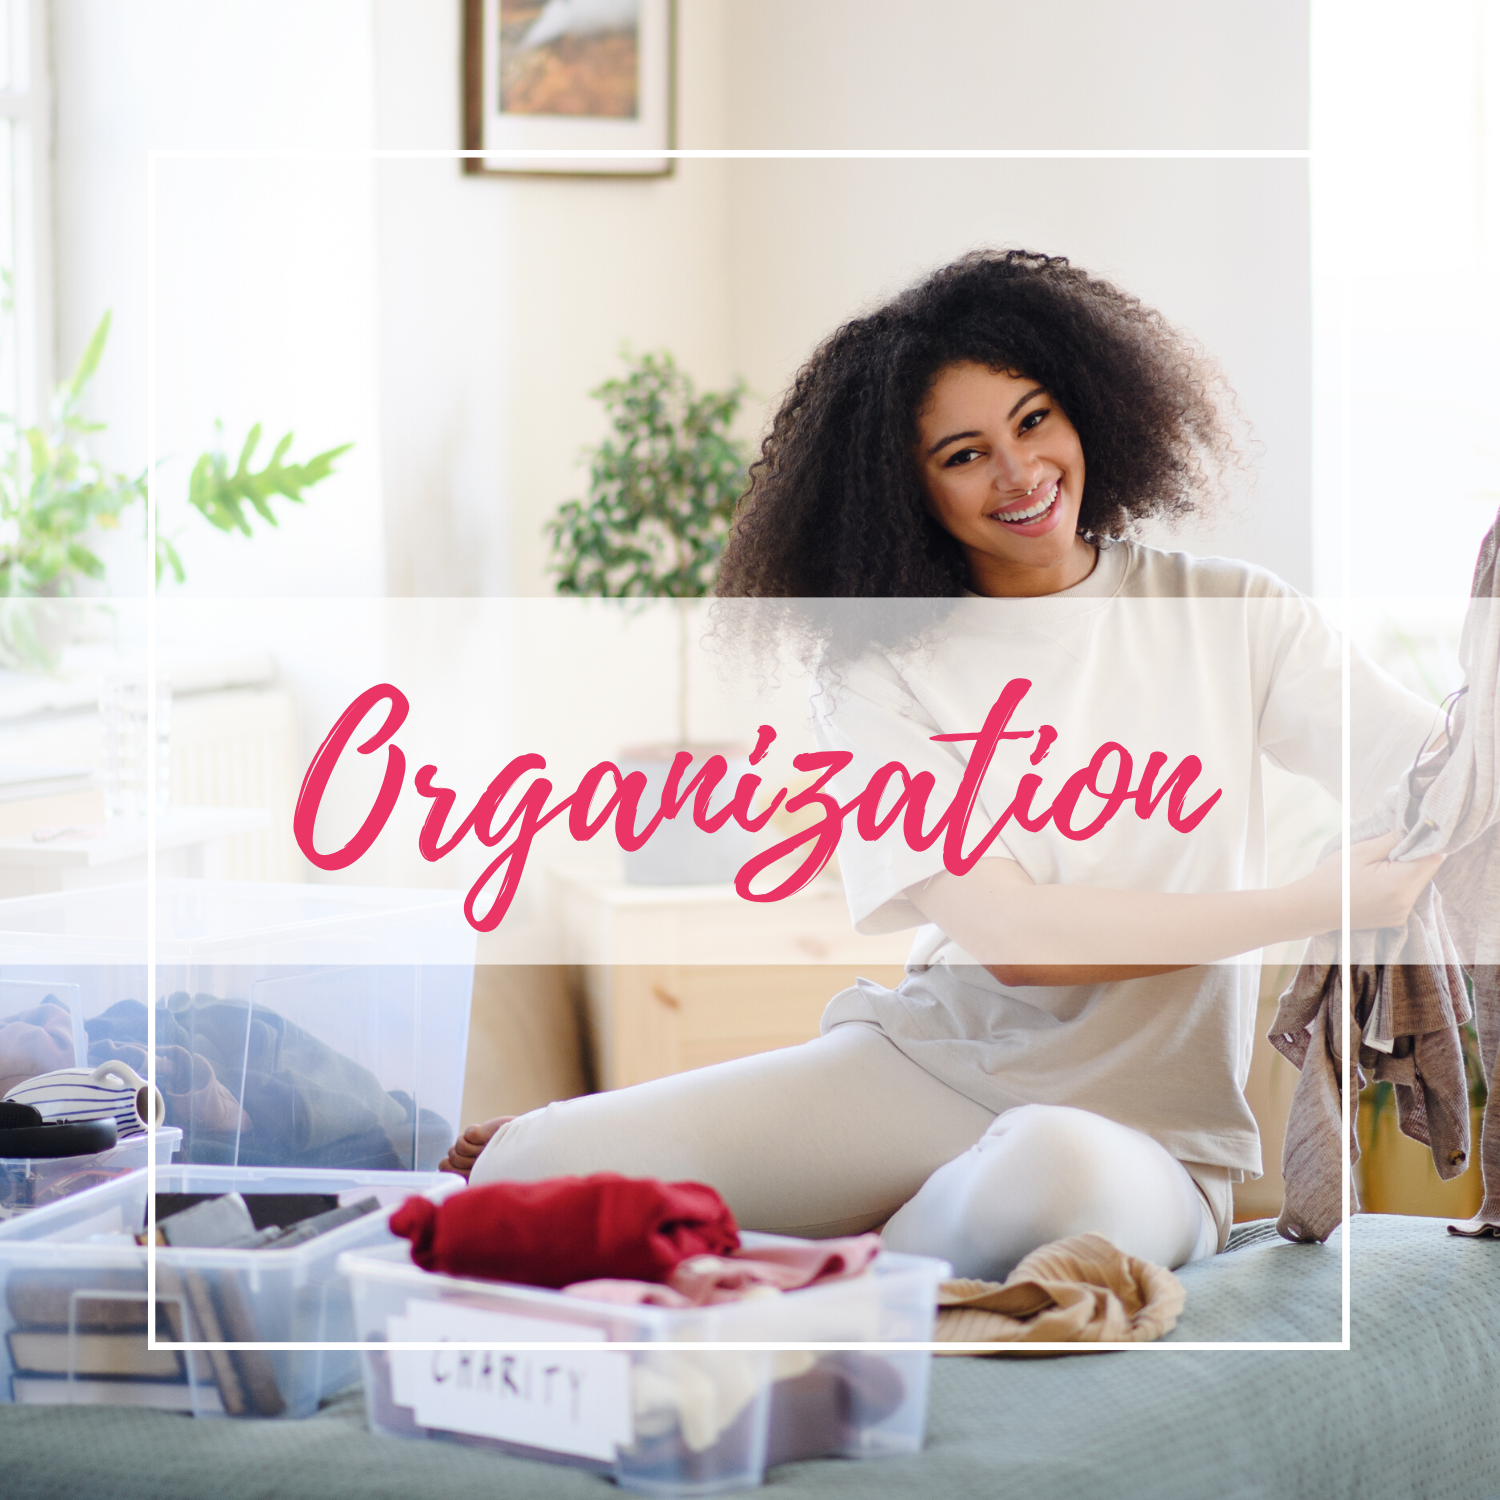 Get Organized to live your best life for God! Get resources to help you here!